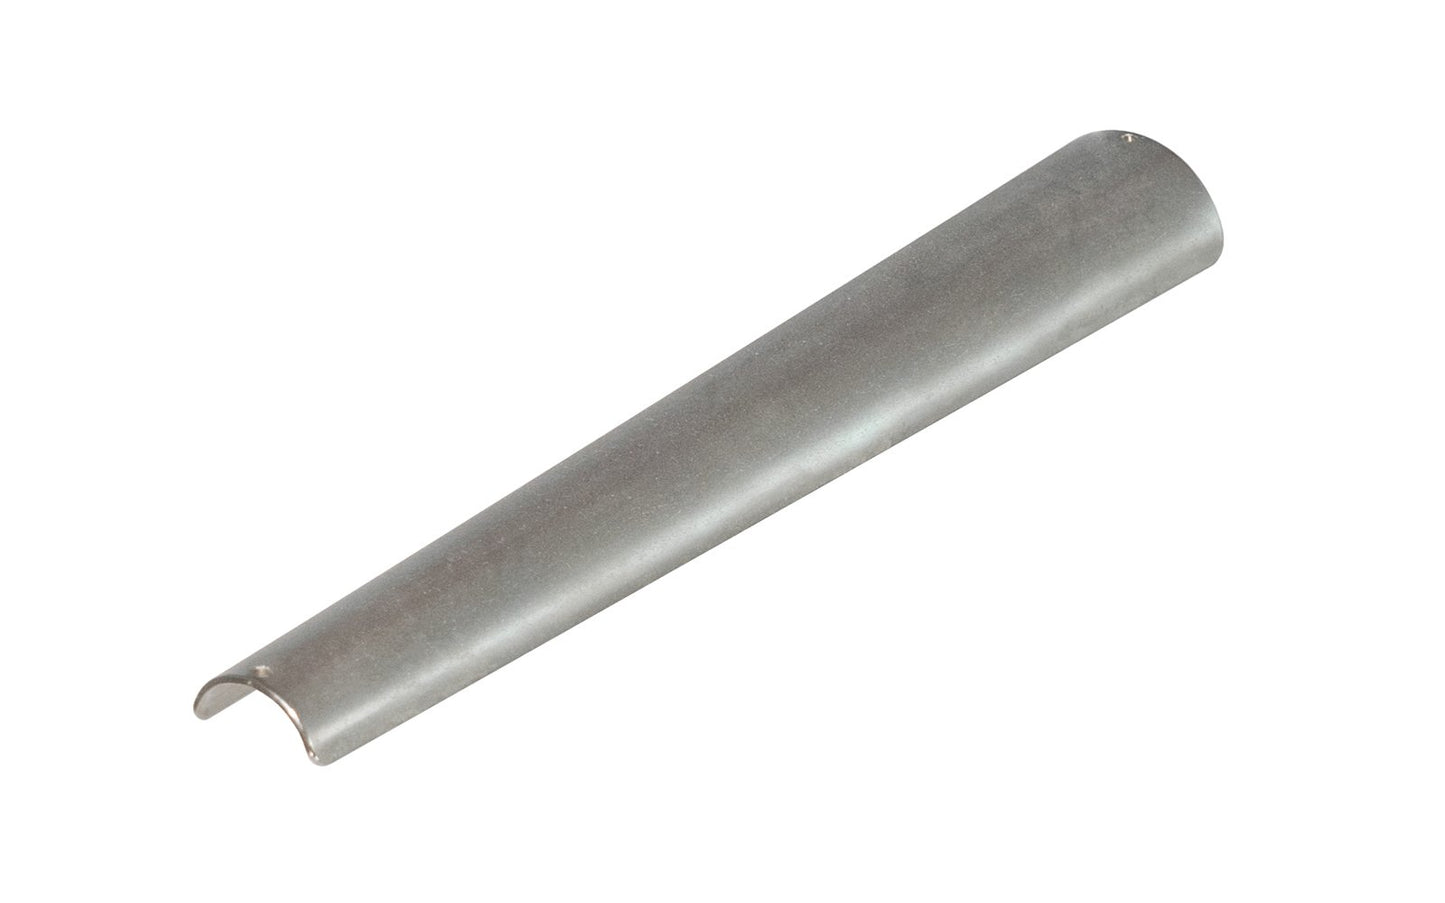 DMT Diamond Large Honing Cone ~ Fine - DCLF - Made in USA ~ Excellent for working gouges, wood turning, tool & die work -Diamond Honing Tapered Cone - Large Size - Blade width tapers from the base 3/4" to 1-1/4" diameter - Half Round . 017042013202